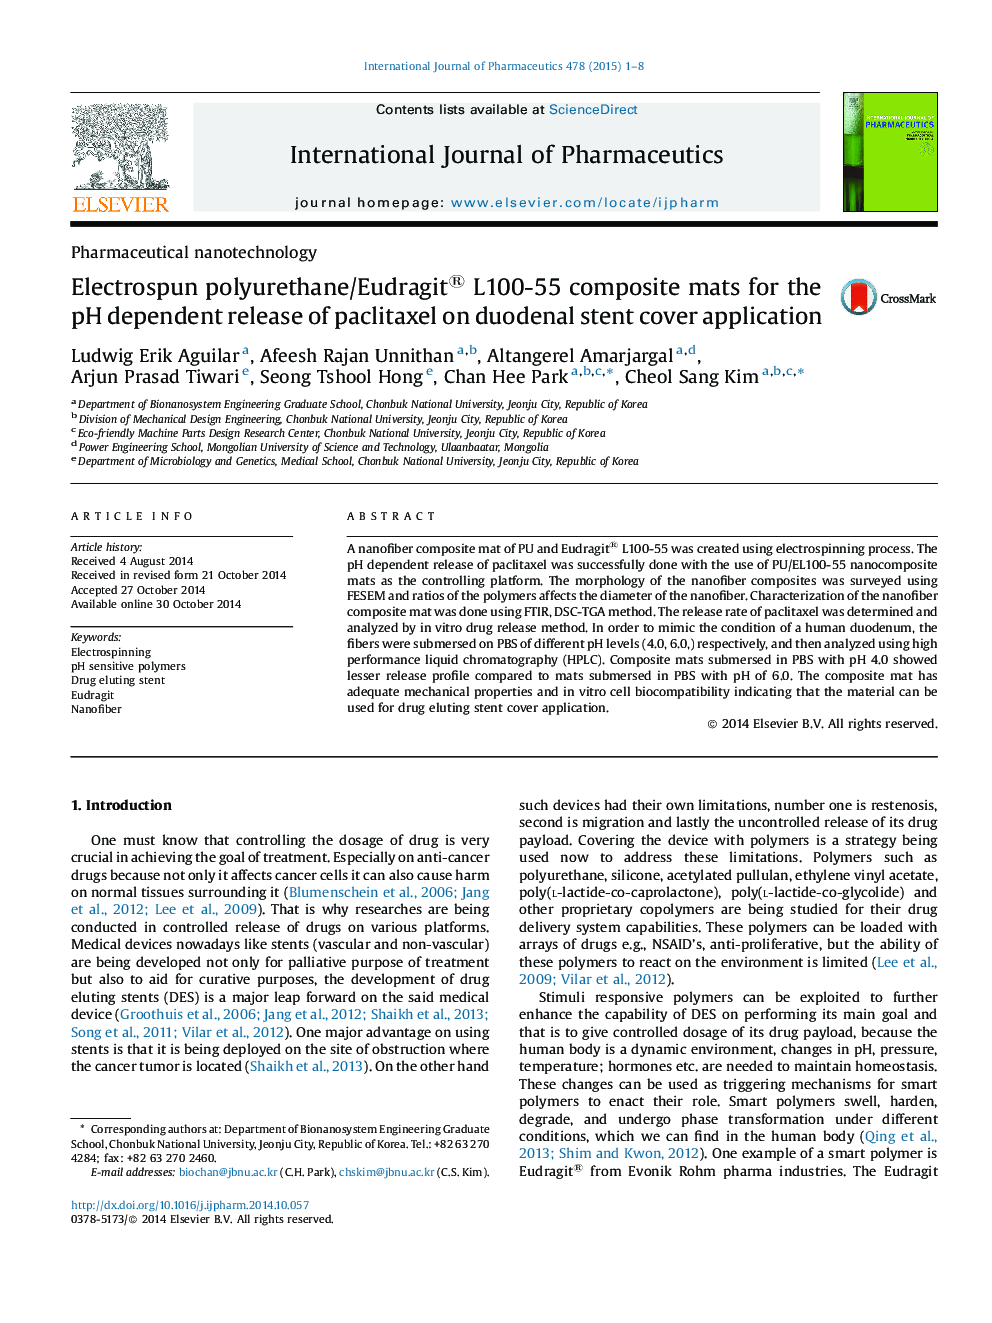 Electrospun polyurethane/Eudragit® L100-55 composite mats for the pH dependent release of paclitaxel on duodenal stent cover application